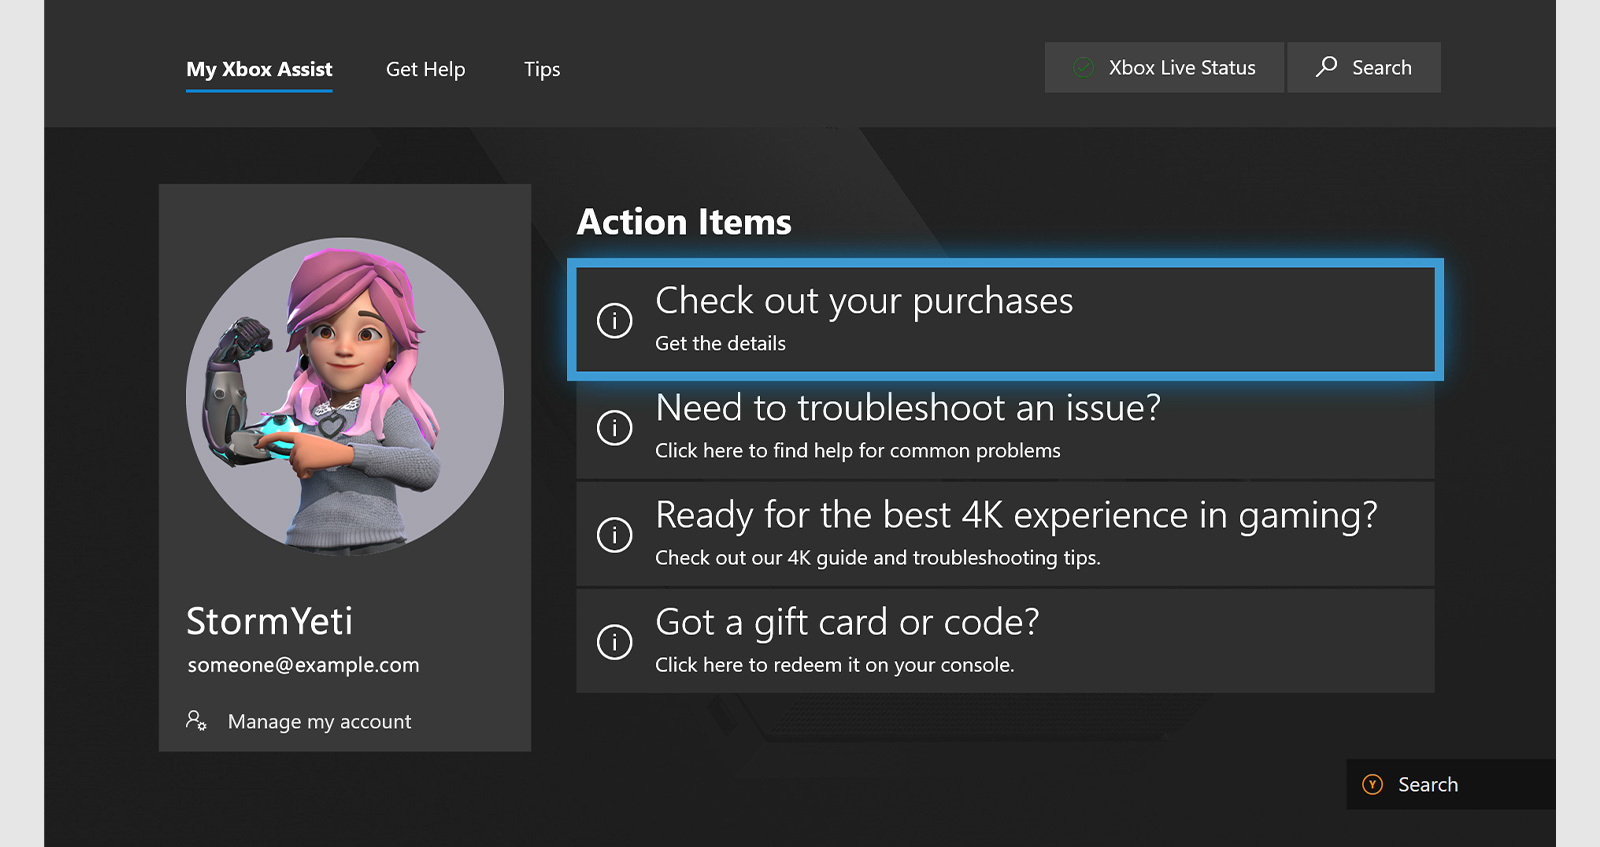 A screenshot showing the Xbox Assist support UI.  Action items list 4 options including Check out your purchases, Need to troubleshoot an issue?, Ready for the best 4K experience in gaming?, and Got a gift card or code?